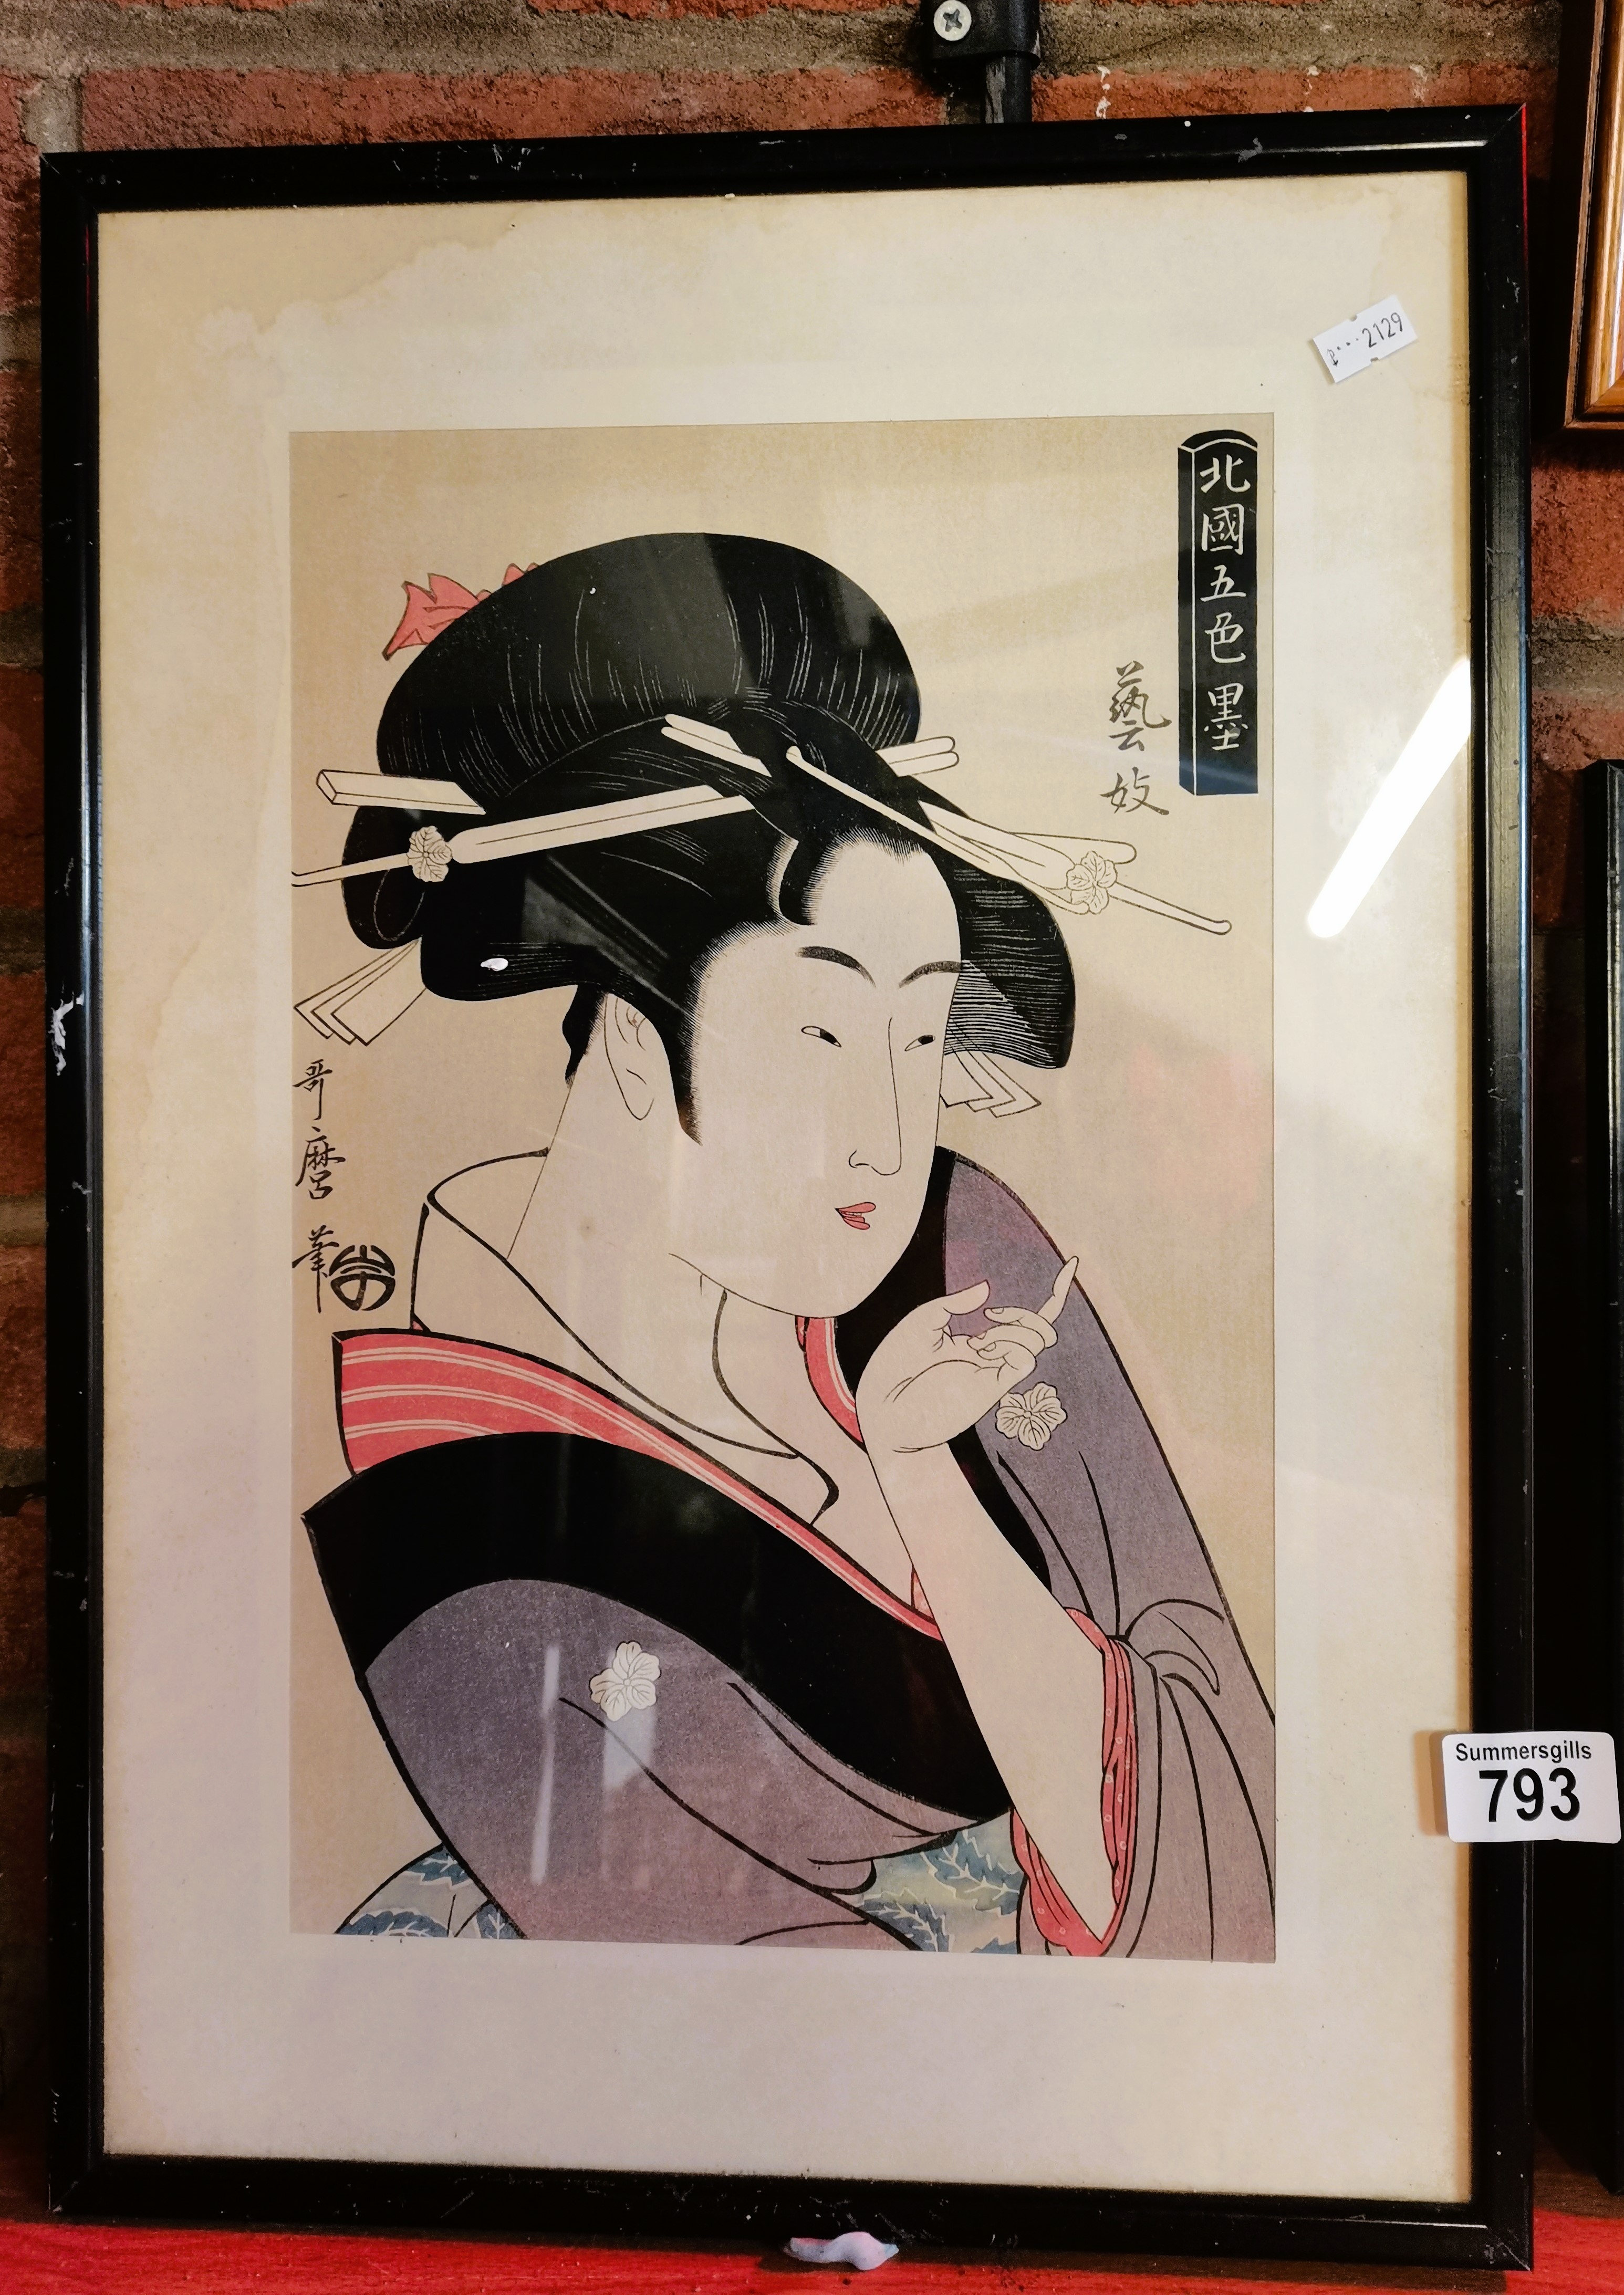 X2 framed Japanese prints with character marks